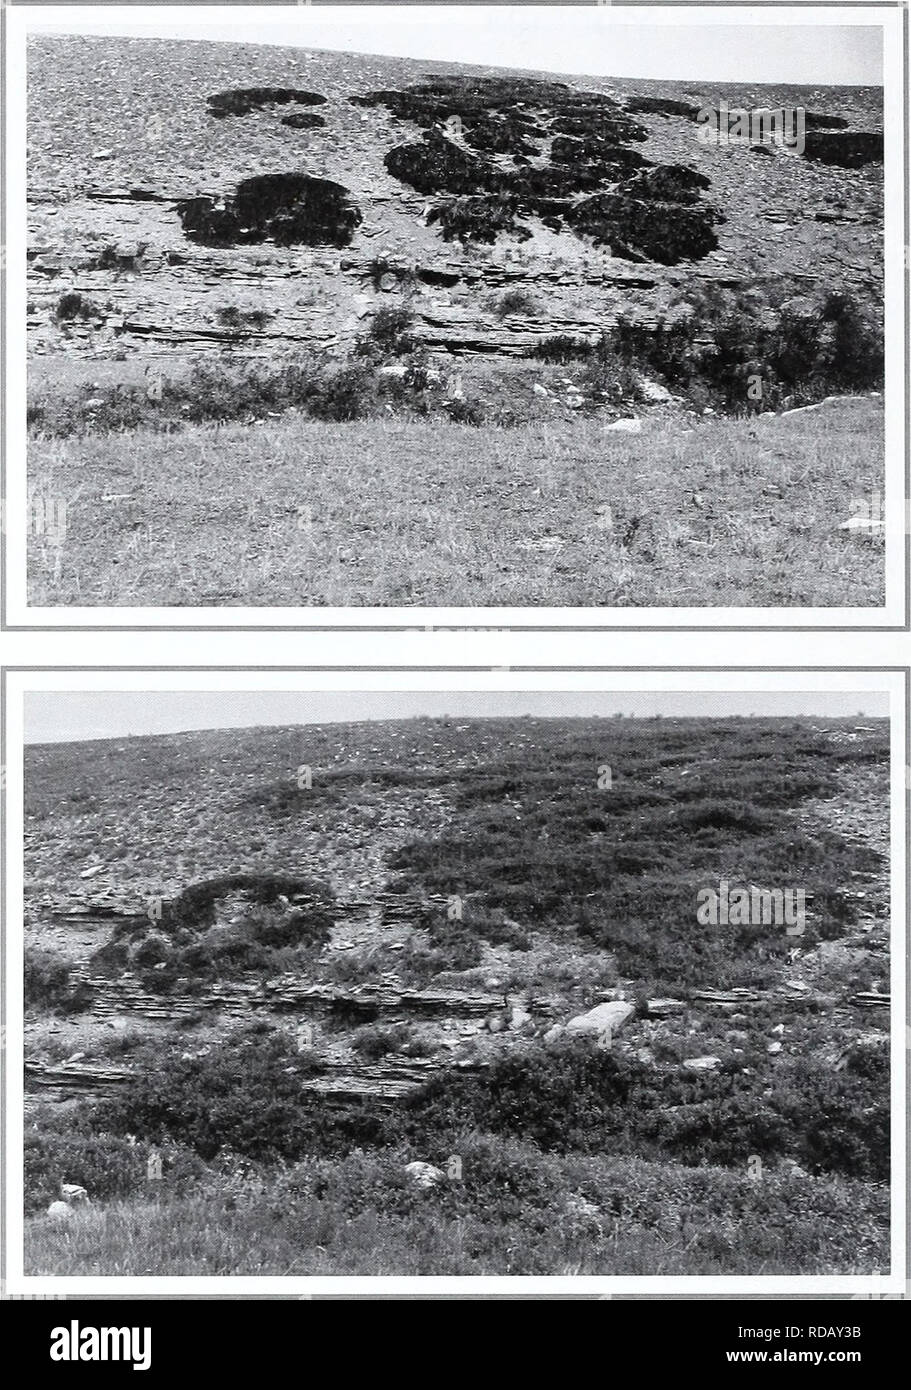 . Eighty years of vegetation and landscape changes in the Northern Great Plains : a photographic record. Range plants; Landscape; Botany; forbs; grasses; landscapes; botanical composition; shrubs; trees. Original Photograph September 23, 1917. ShantzR-9-1917. Facing north. First Retake and Description June 29, 1959. W.S.P., G-6-1959. Clumps of Juniperus growing on the side of a wash cut in the original picture. Dr. Shantz mentions both Juniperus horizontalis and Juniperus commu- nis. In the retake there was only one plant of Juniperus communis left. The shrub in the foreground is mainly Shephe Stock Photo